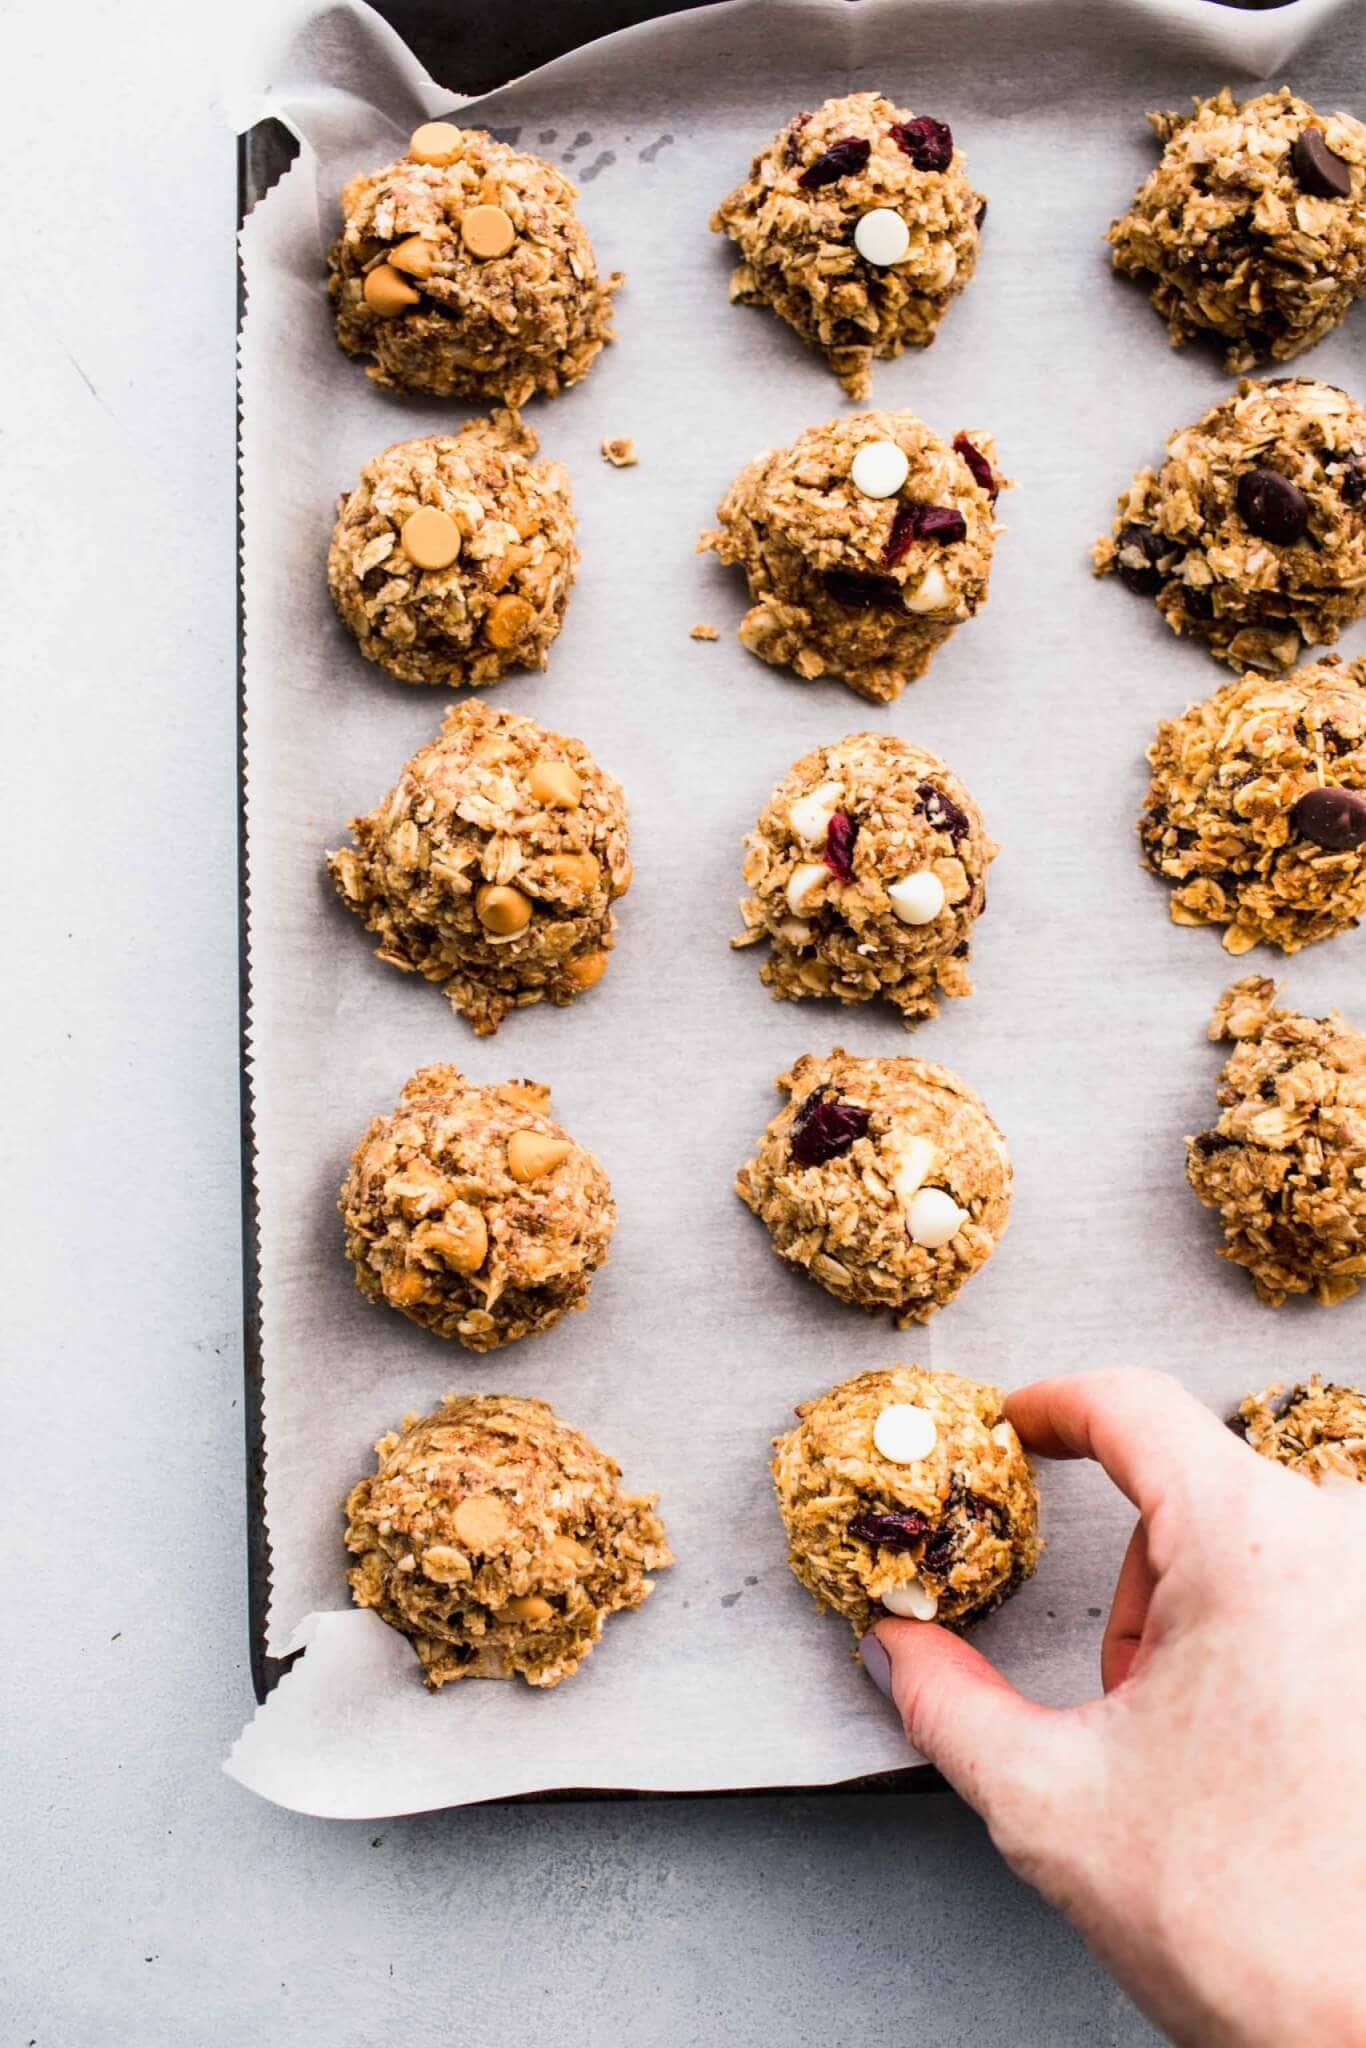 Hand picking up no-bake energy bite from cookie sheet